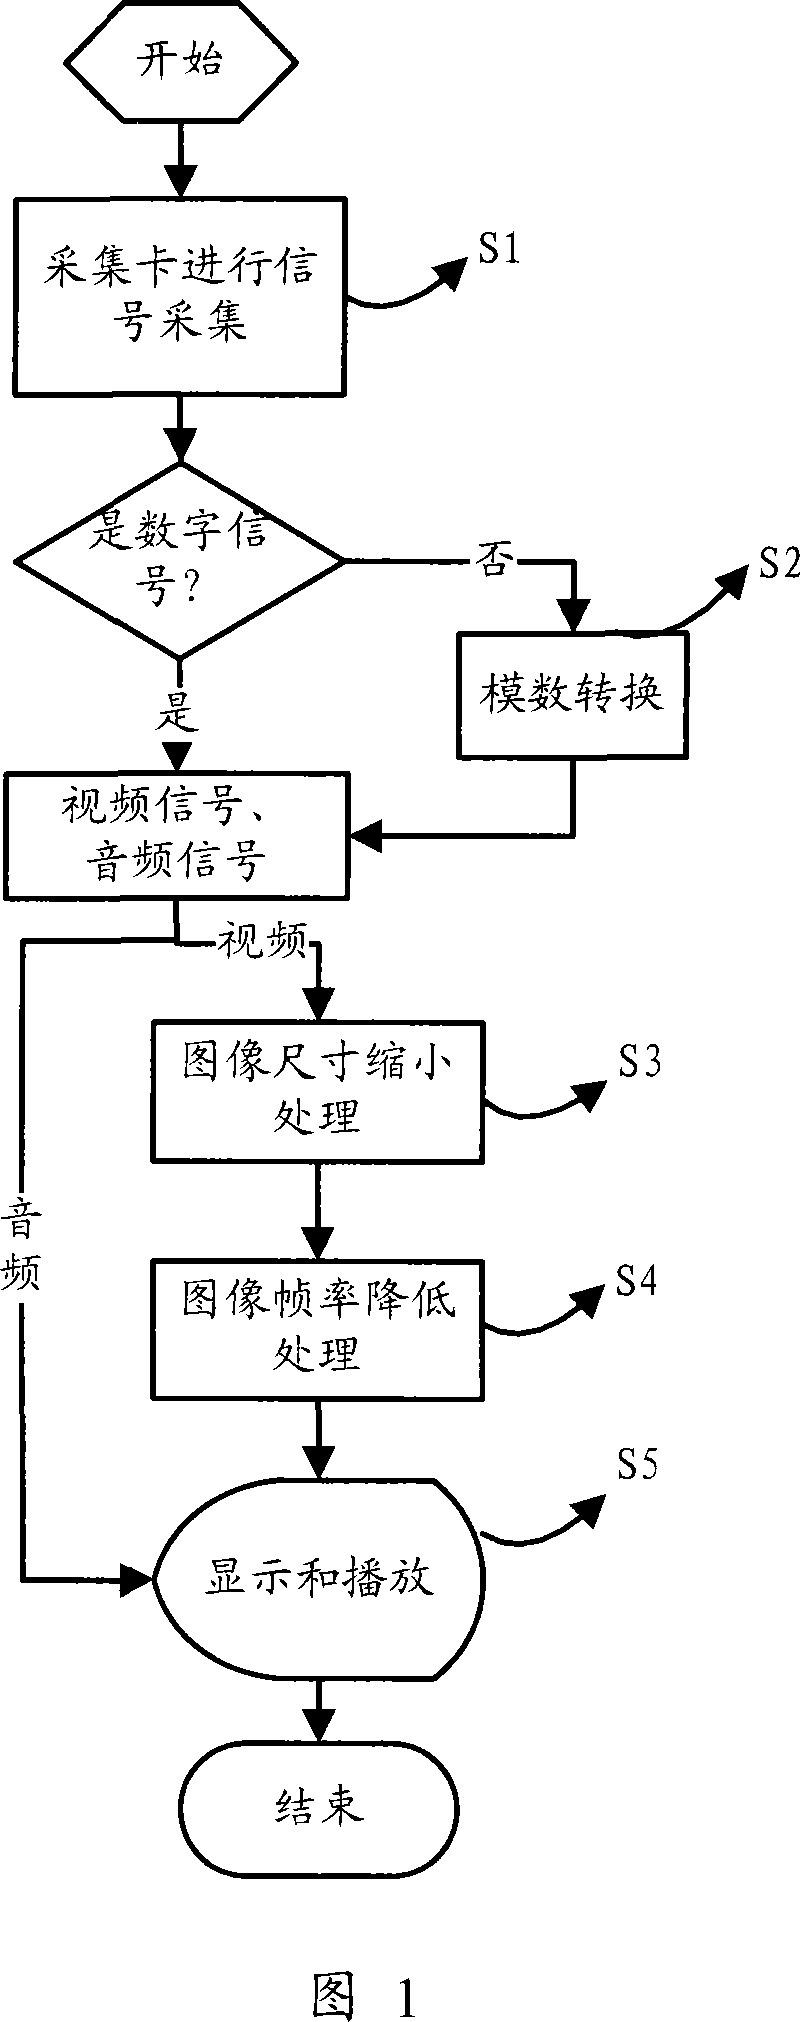 A method for real time monitoring signals of encoding device